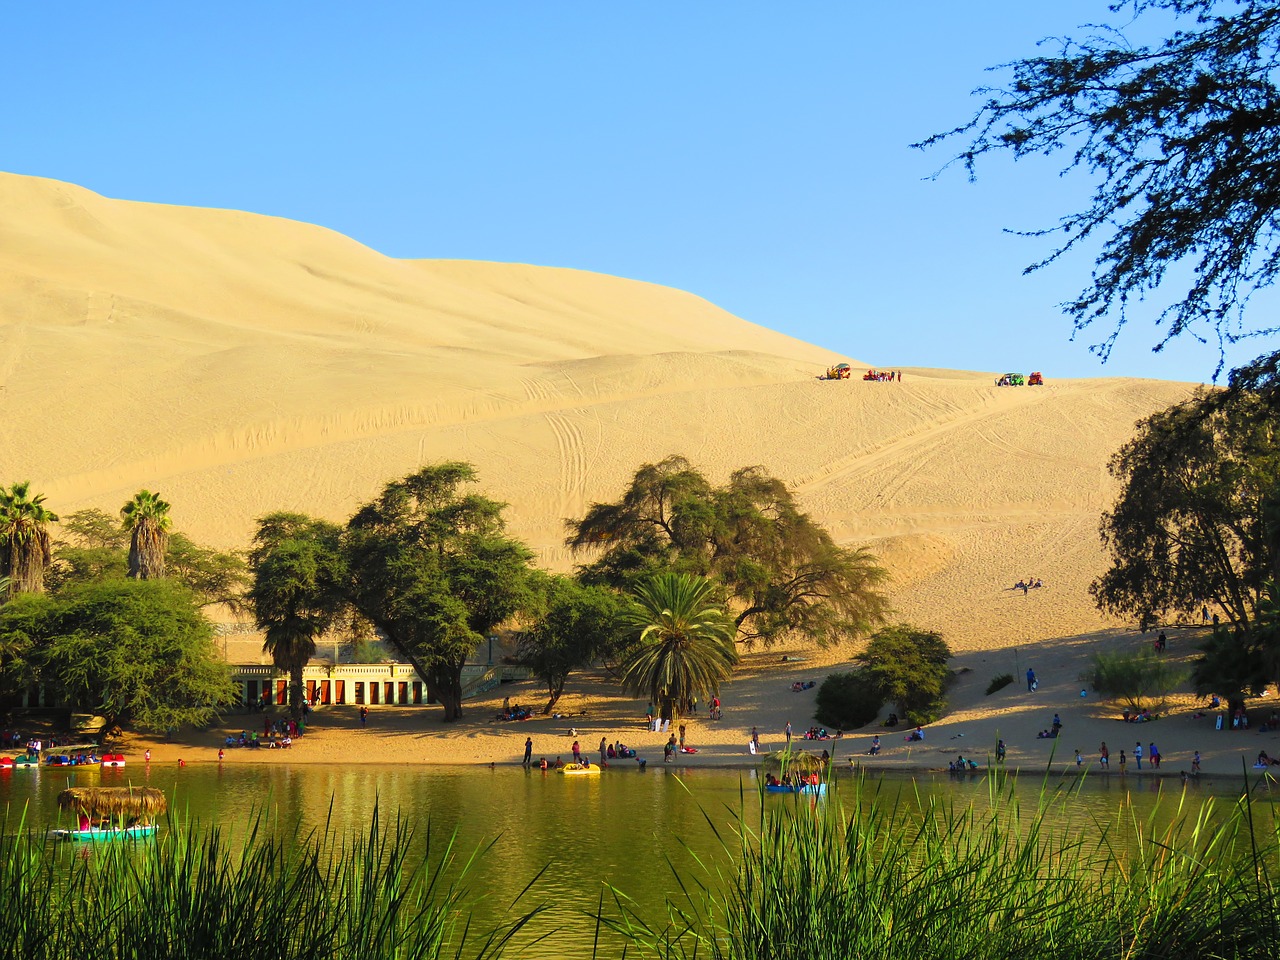 Huacachina is one of the most Beautiful Places in Latin America